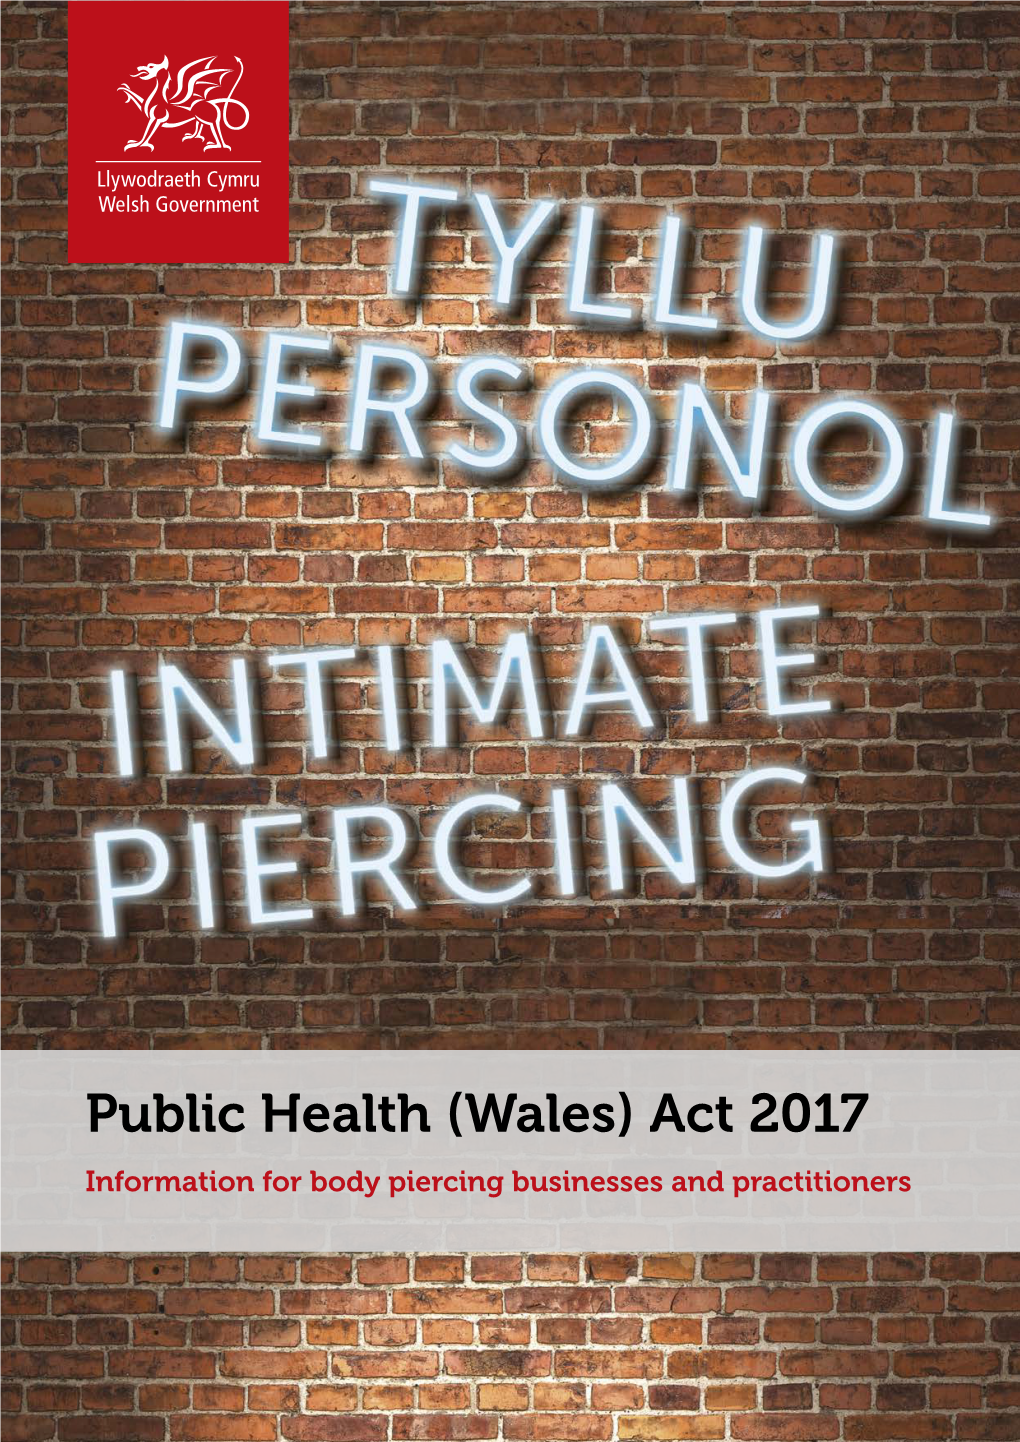 Public Health (Wales) Act 2017